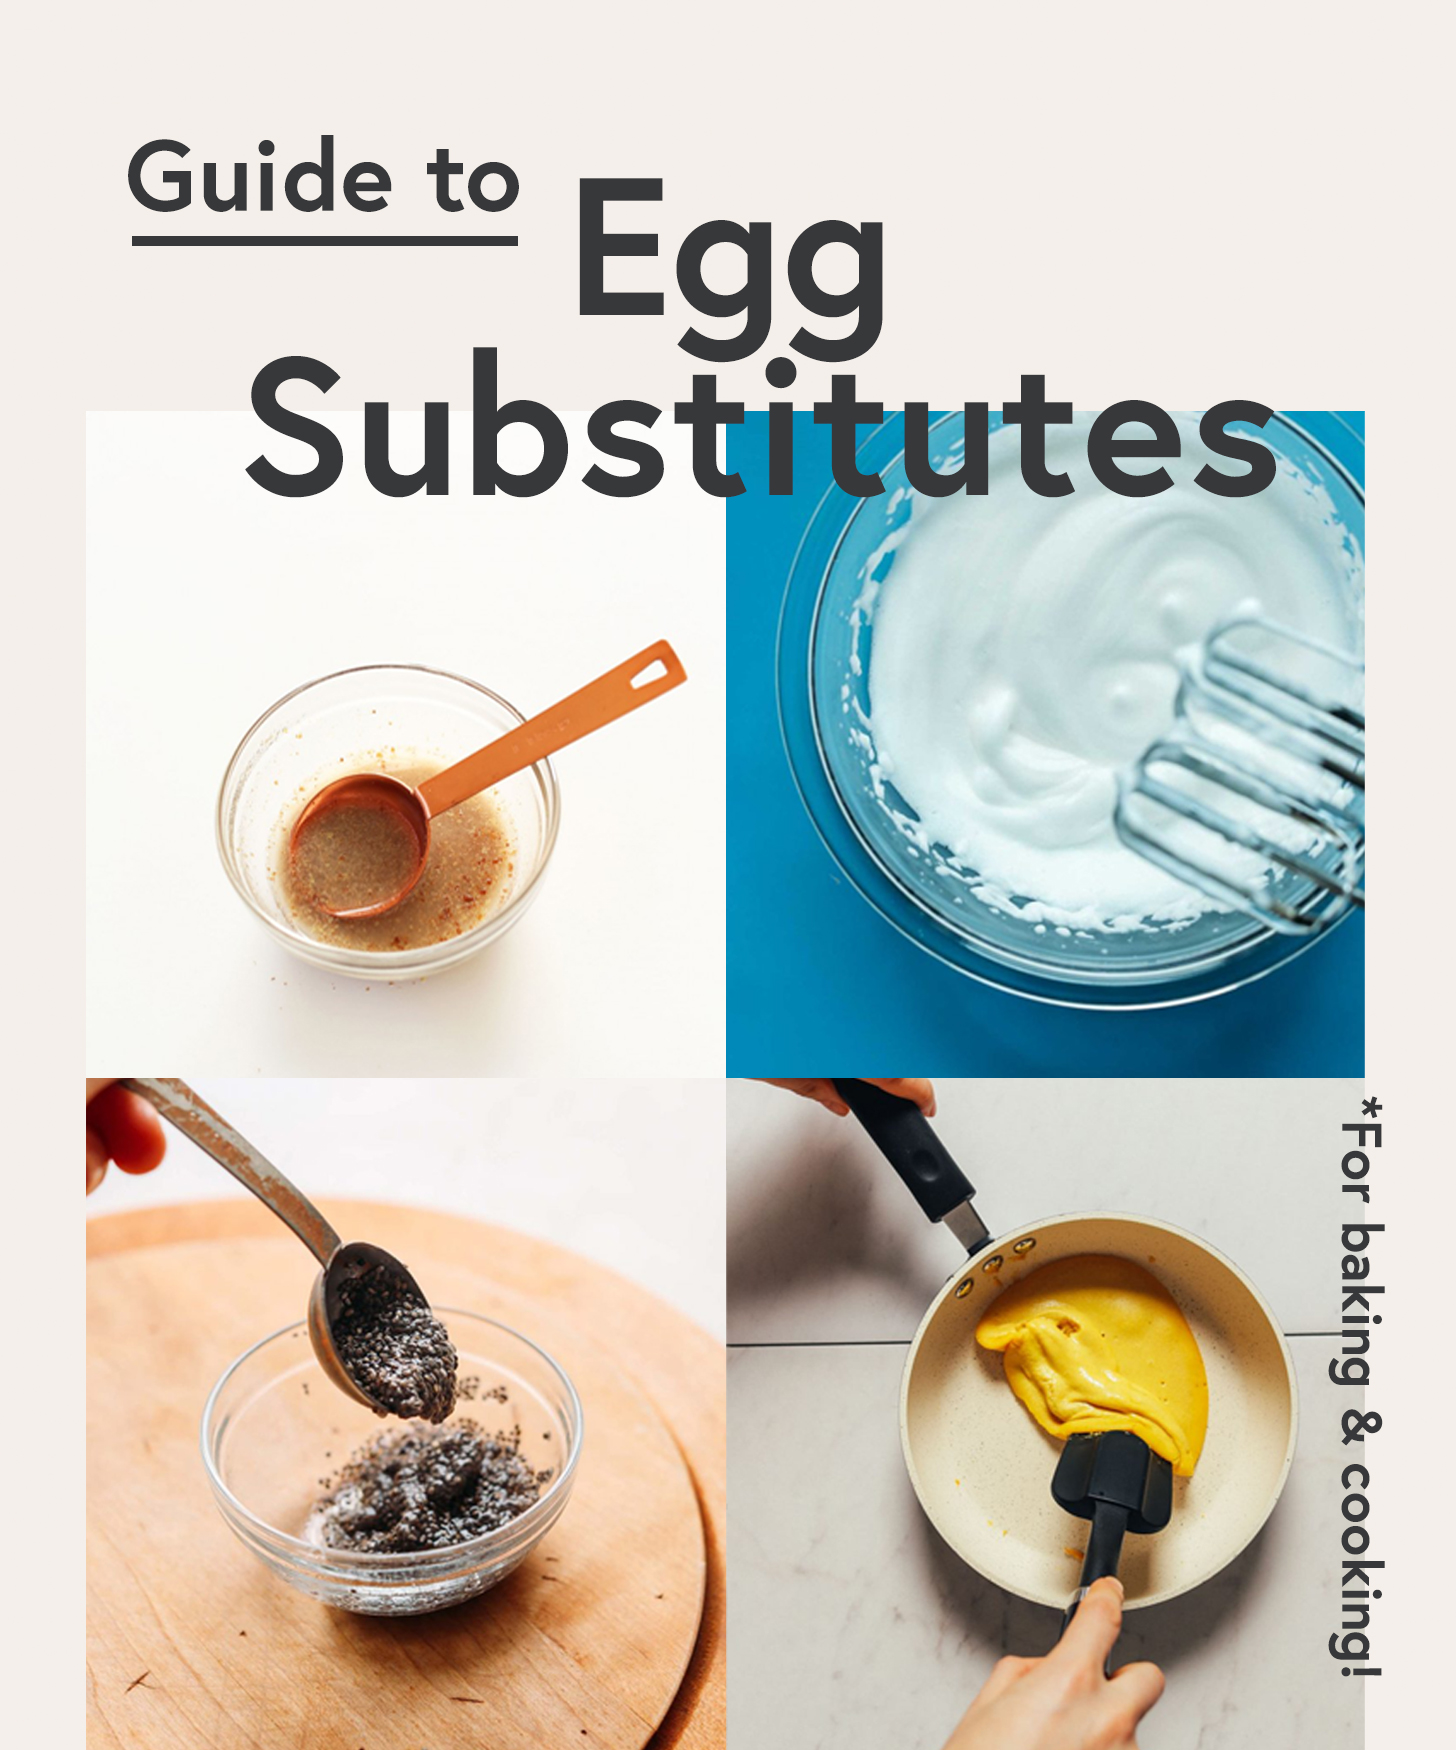 Photo showing four egg substitutes for egg-free baking and cooking